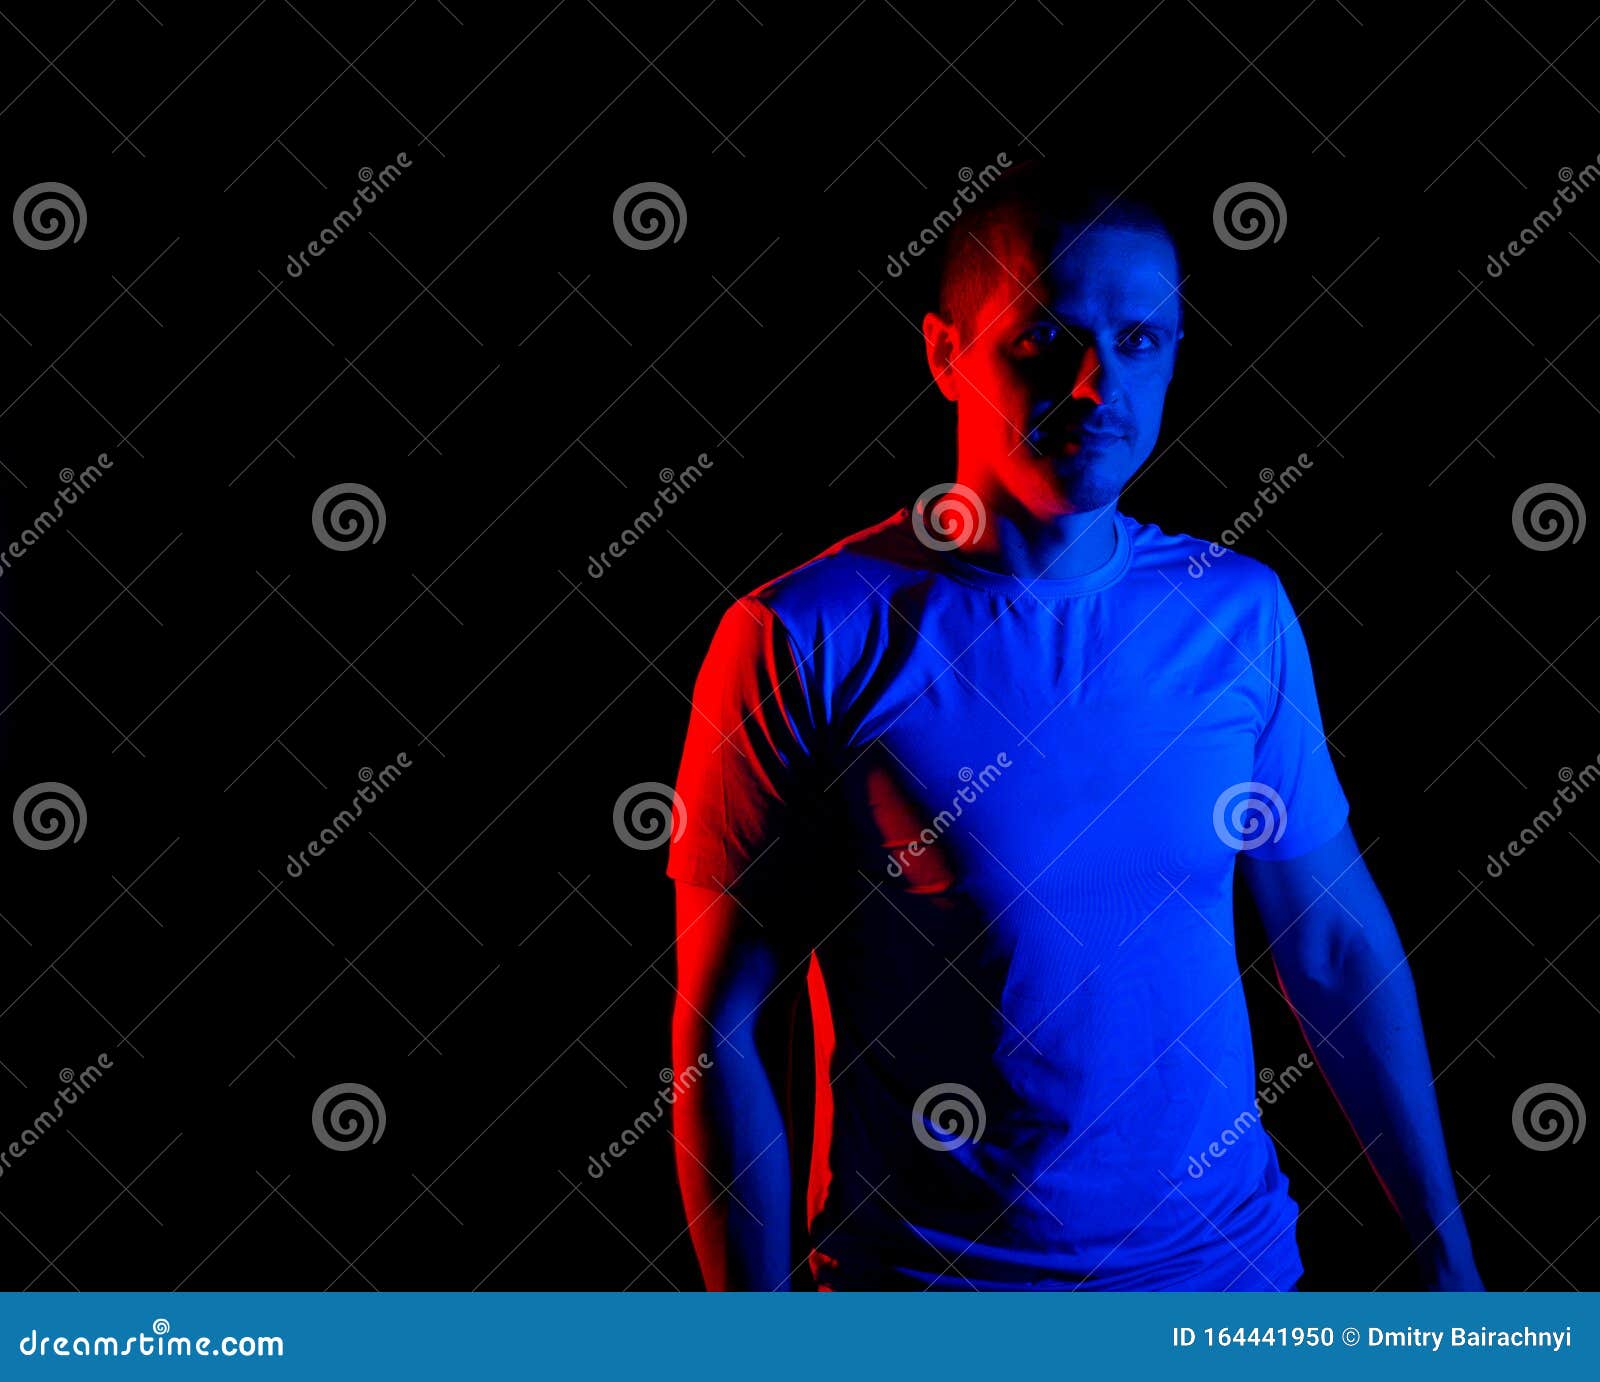 Man with Red and Blue Light Looking in Stock Photo - Image of fashion, person: 164441950